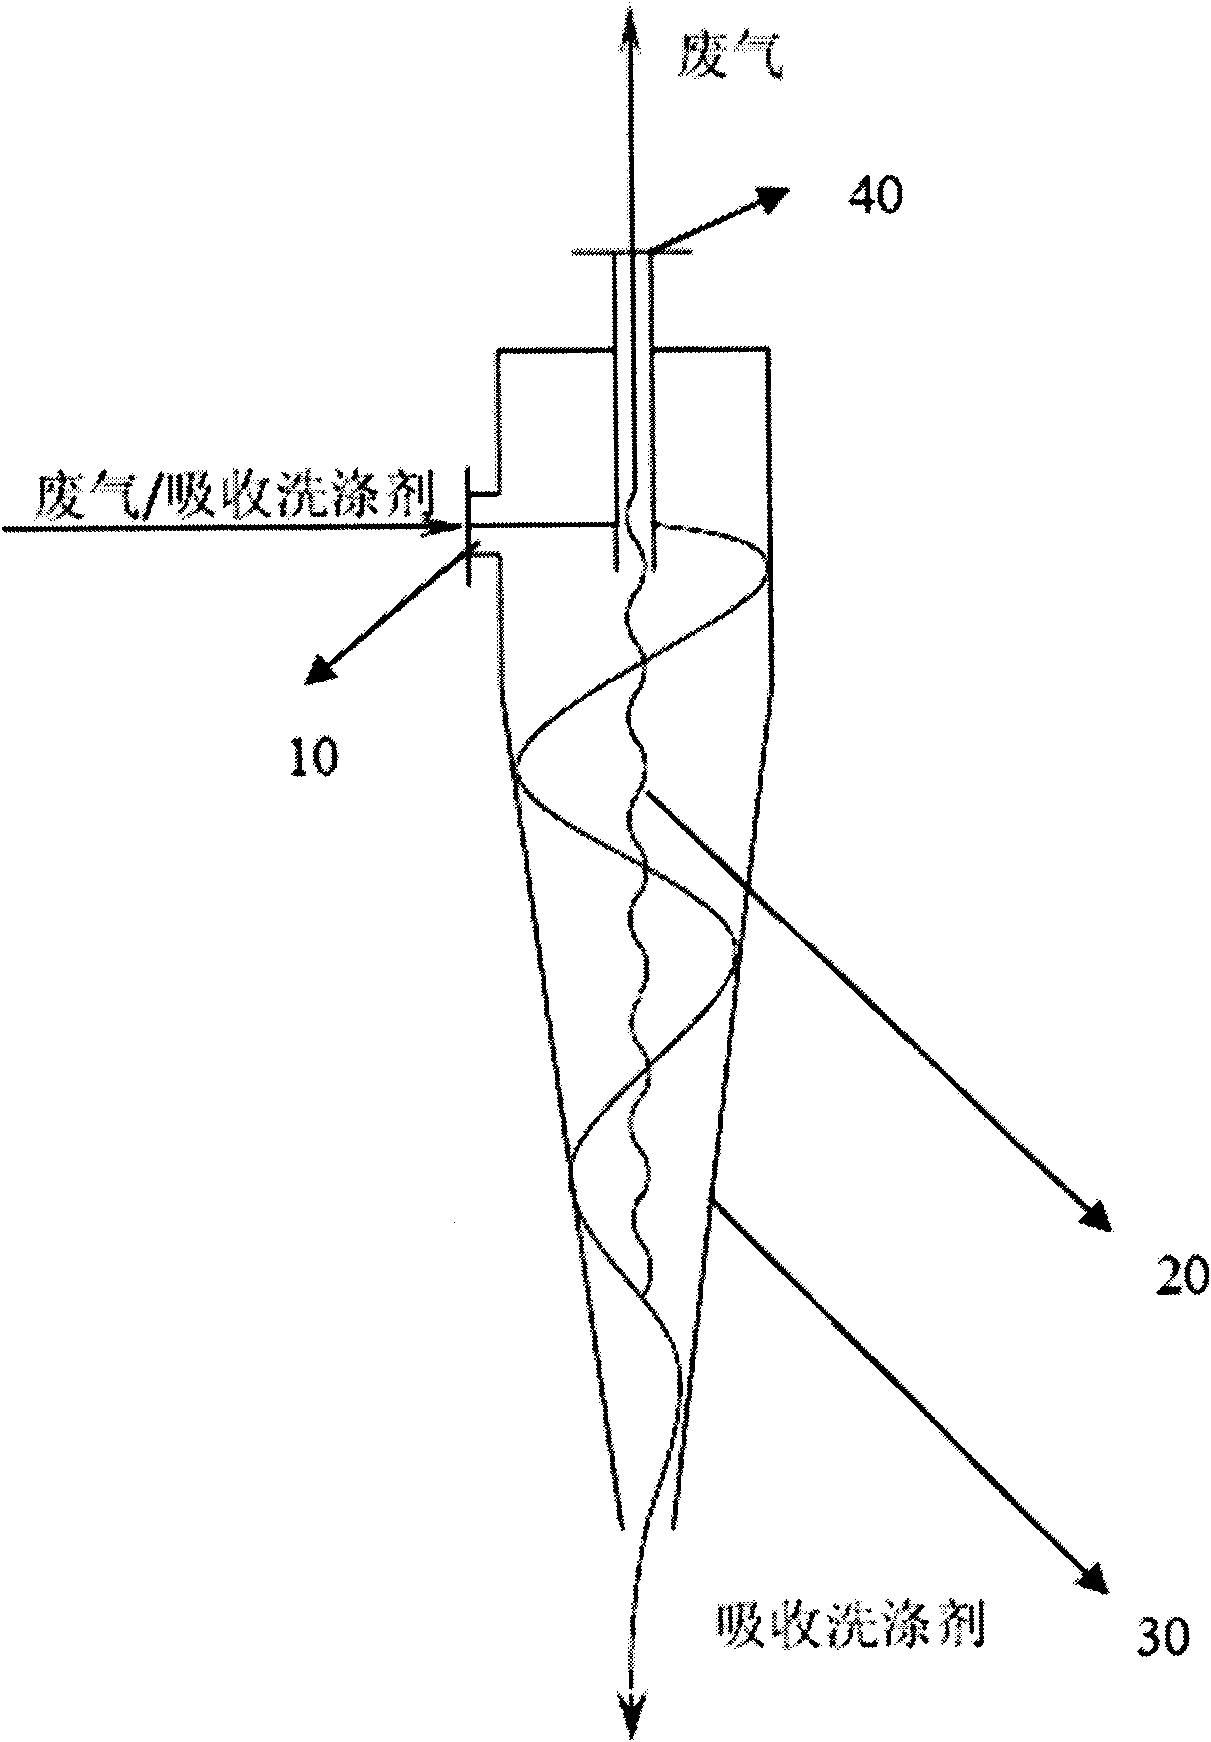 Method and device for absorbing and whirling waste gas